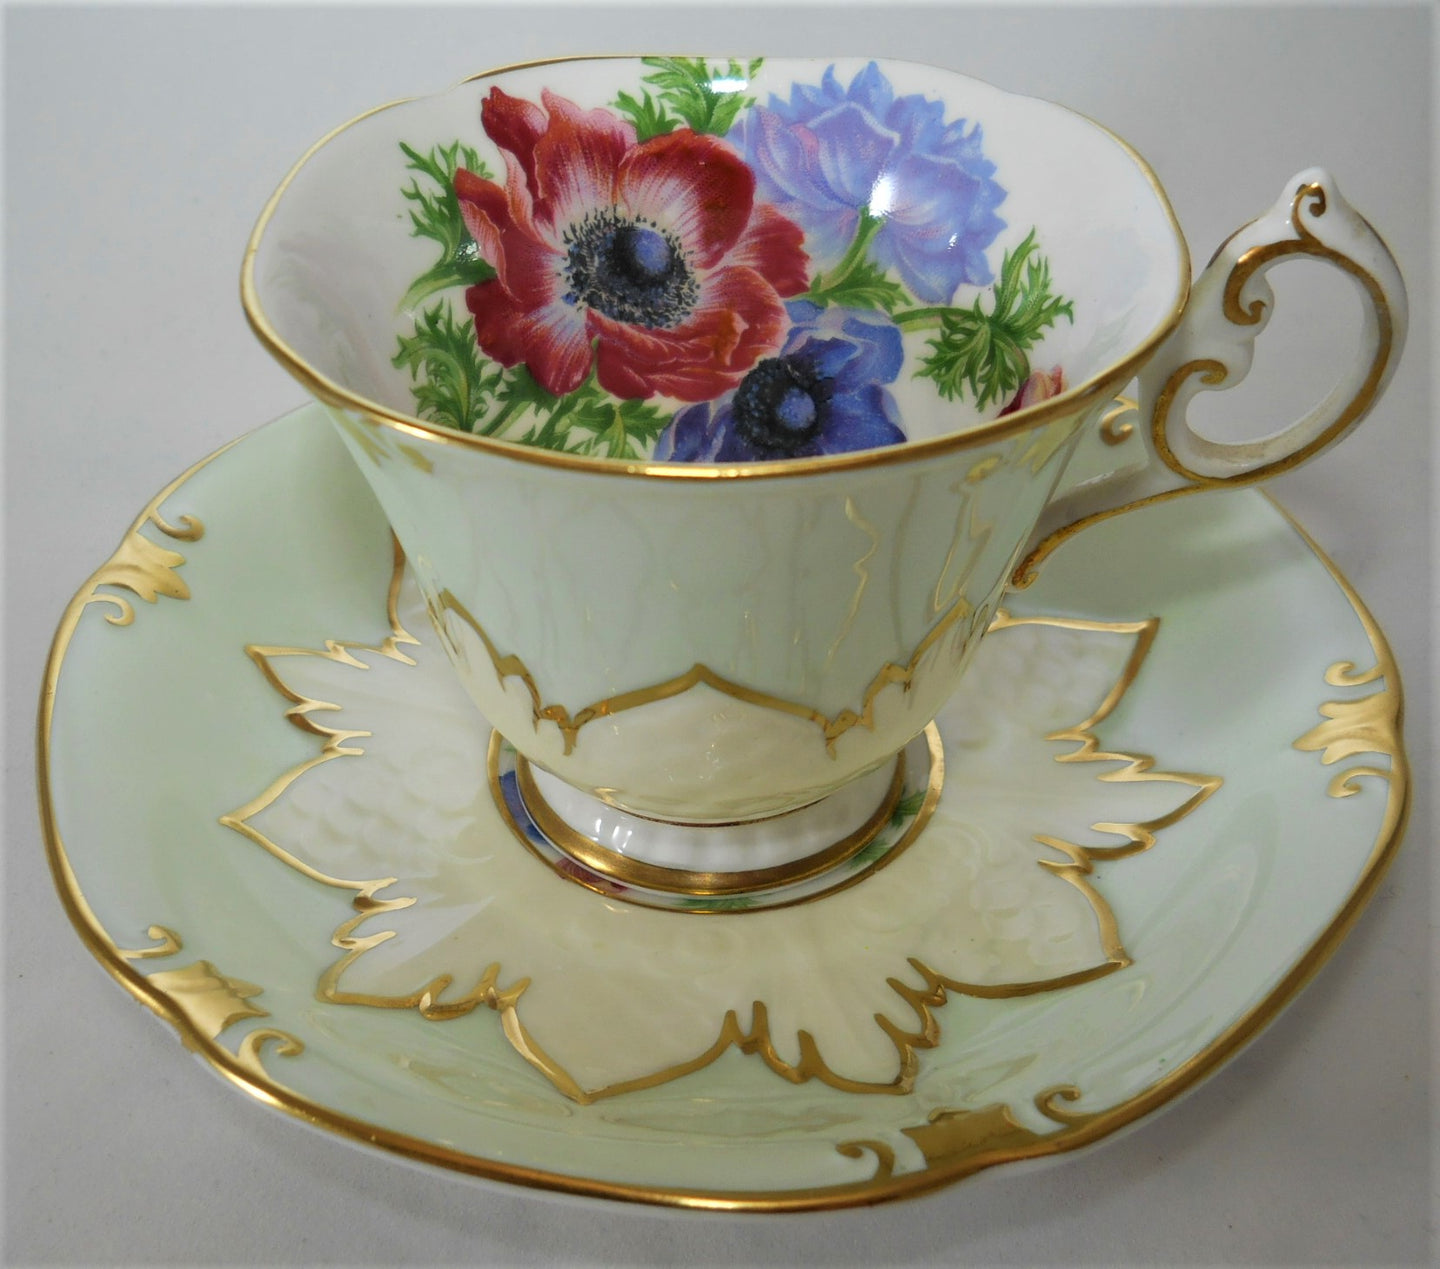 Paragon England Mint Green and White Embossed with Red/ Purple and Violet Anemone Flowers Teacup/Saucer Pair